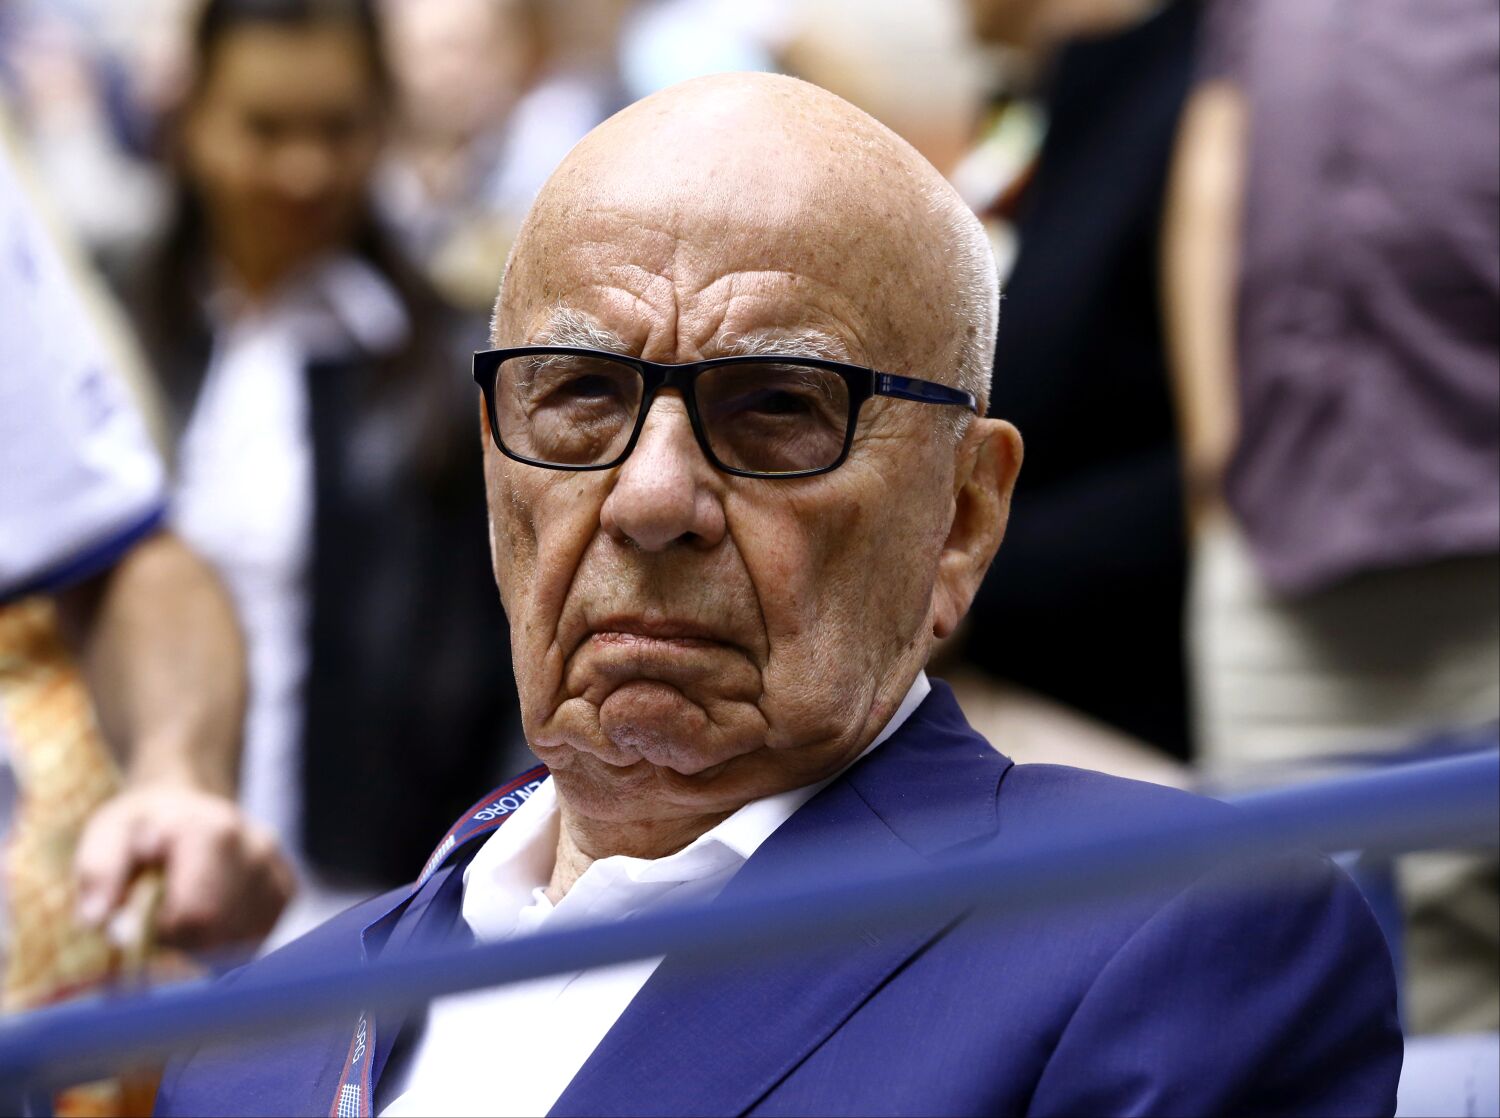 Murdoch has survived scandal after scandal. Will Dominion-Fox News lawsuit be different?